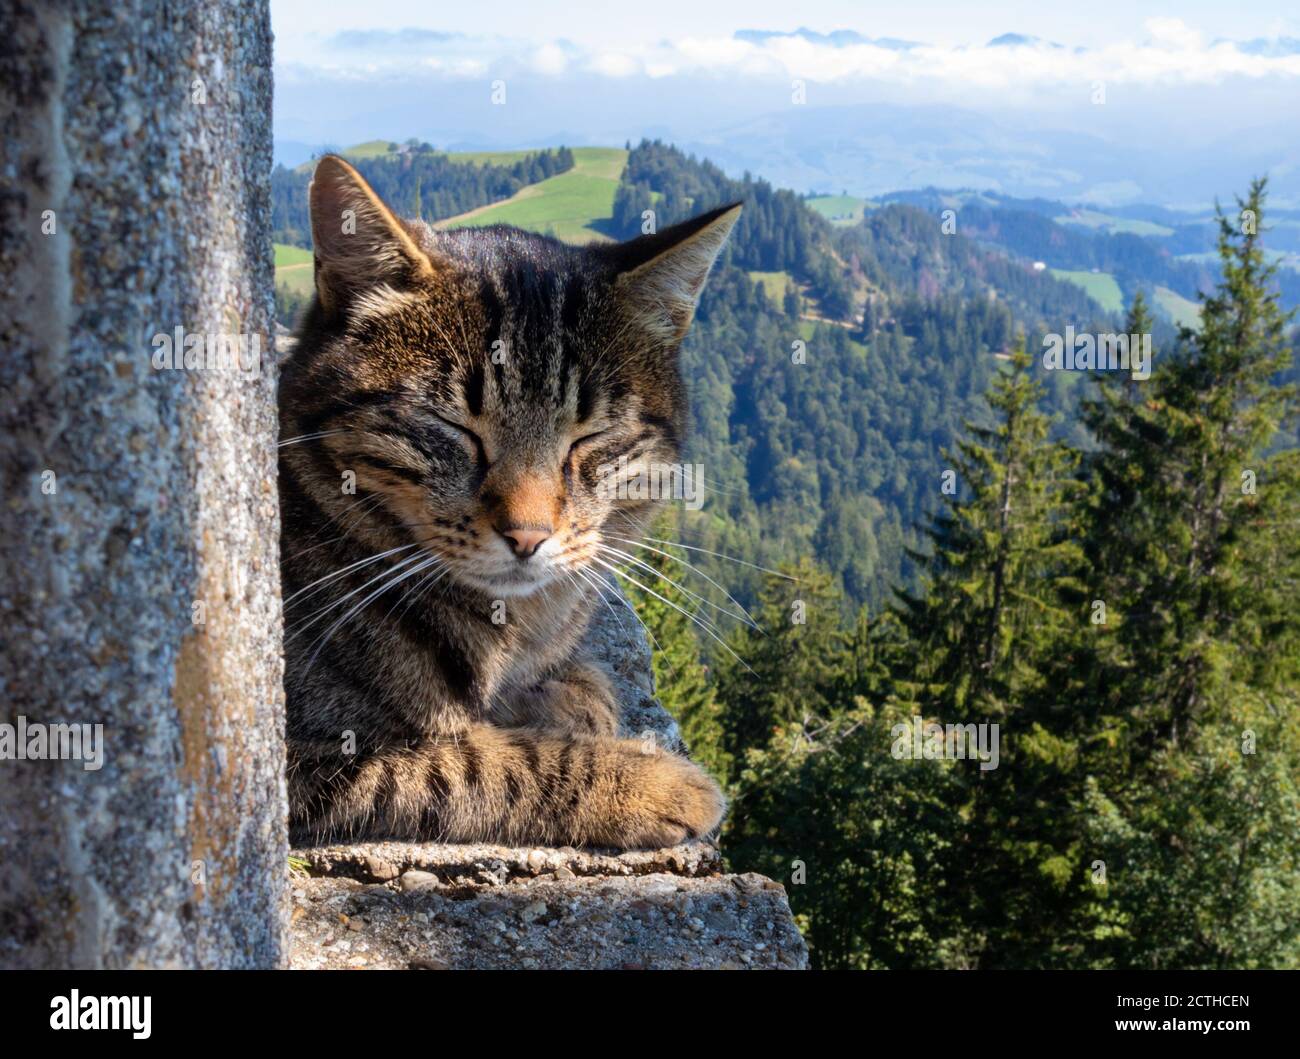 Adult tabby cat resting with eyes closed. Cat is on stone bench in front of scenic mountain background and blue sky with clouds. Napf, Switzerland Stock Photo